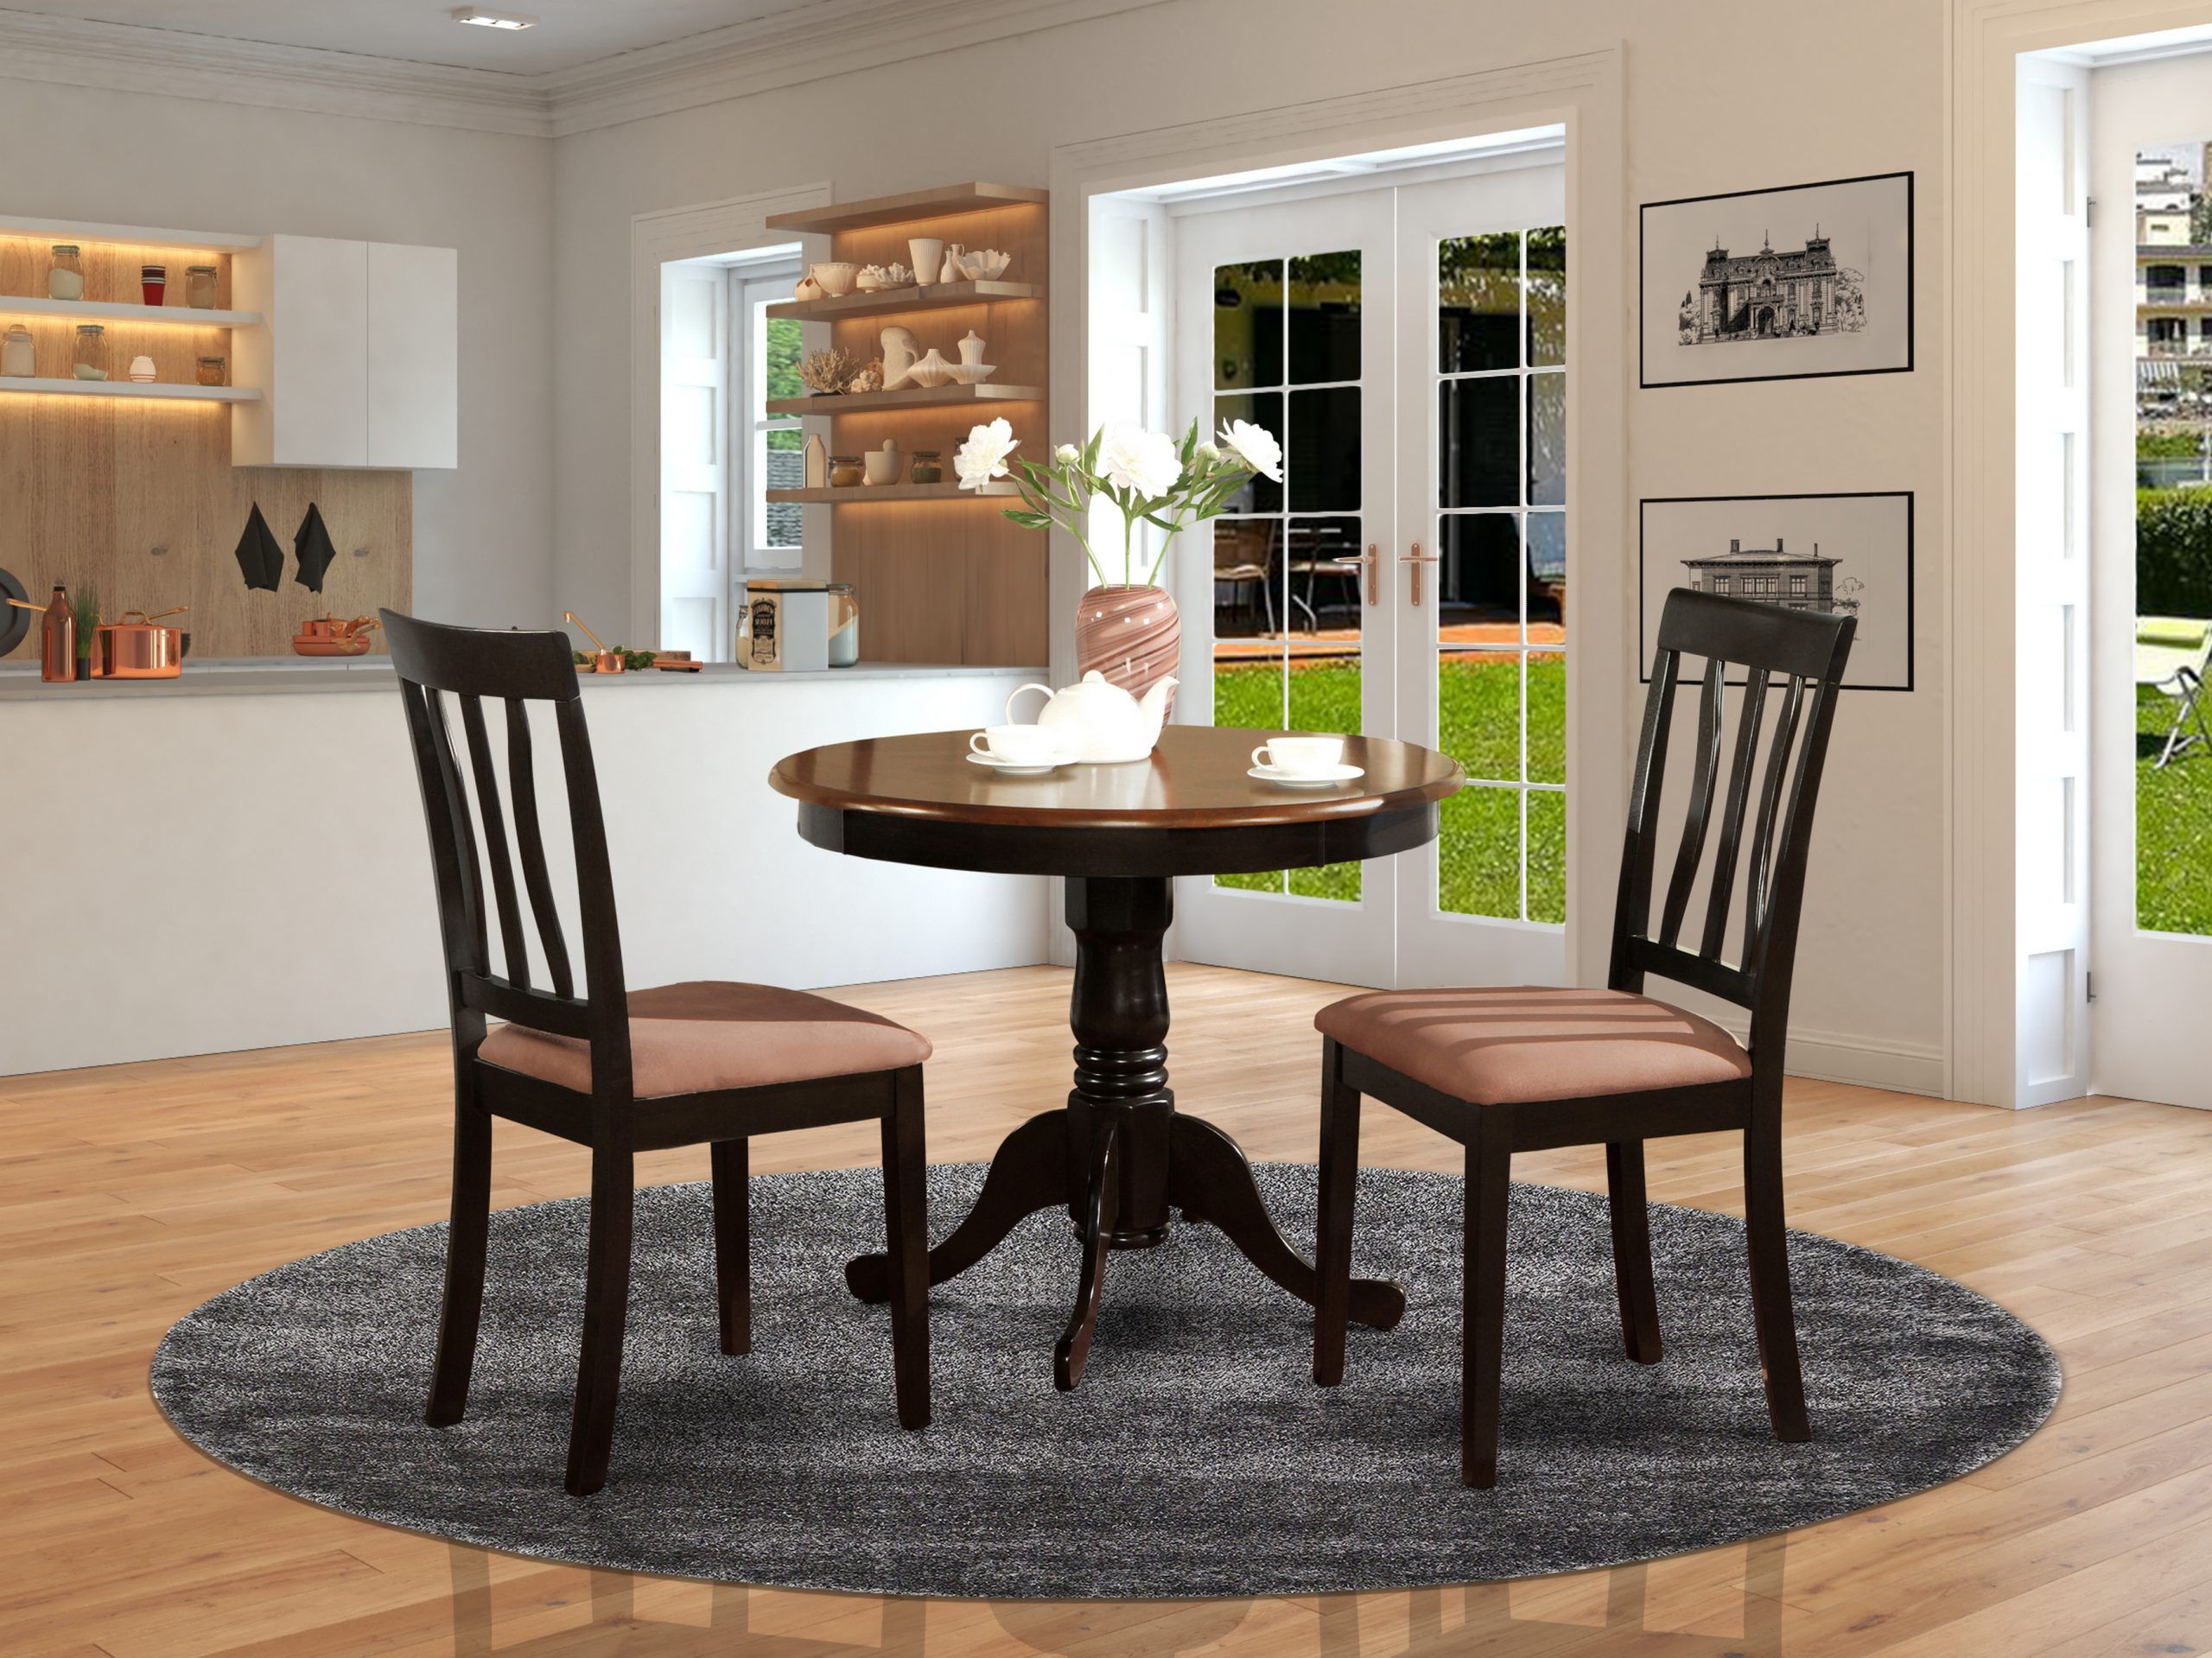 2 Piece Round Console Tables Set With Regard To Well Known Anti3 Blk C 3 Pc Kitchen Table Set Round Kitchen Table (View 5 of 10)